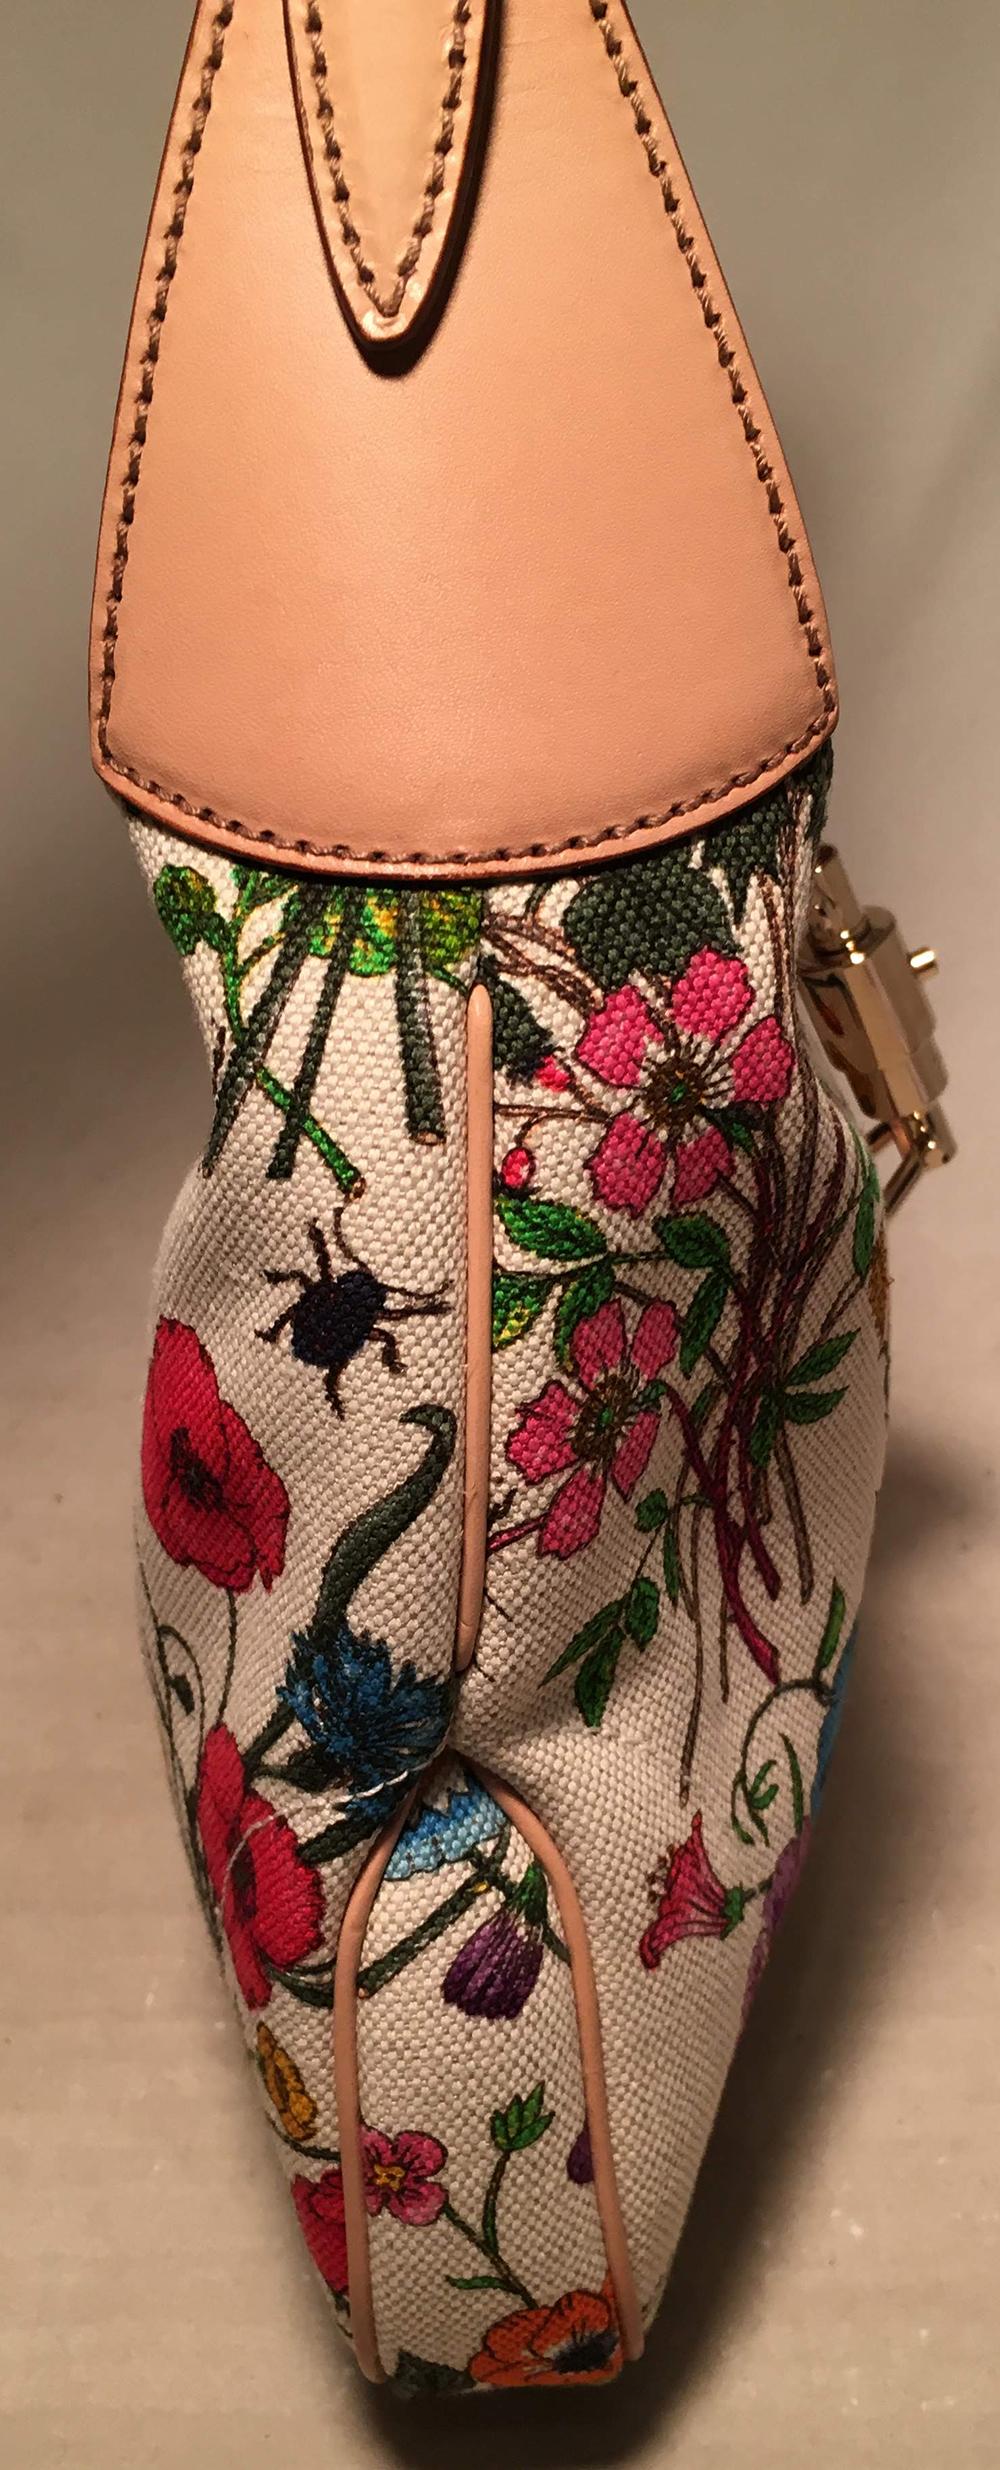 Gucci Multicolor Floral Print Canvas Jackie Shoulder Bag in excellent condition. Multi color floral print canvas exterior trimmed with tan leather and gold hardware. Adjustable buckle leather shoulder strap. Push latch strap closure opens to a tan